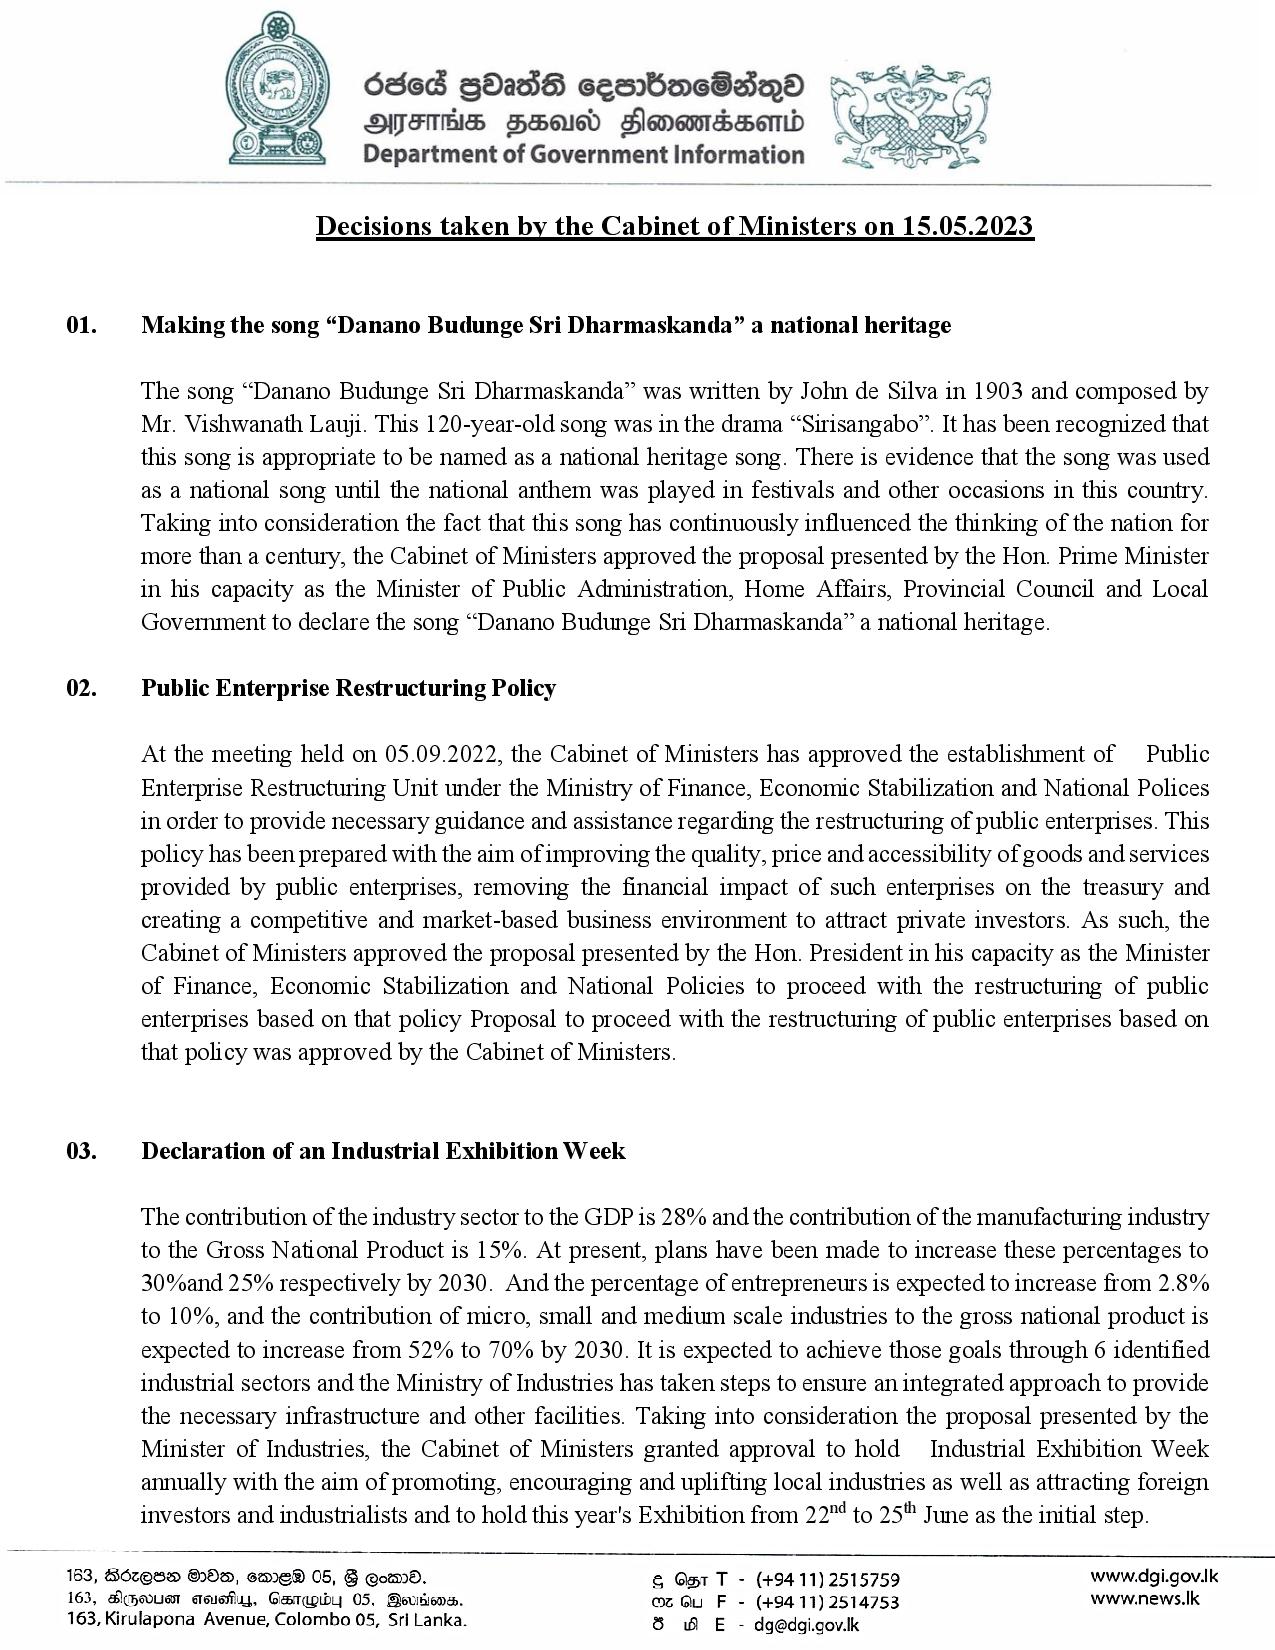 Cabinet Decision on 15.03.2023 English page 001